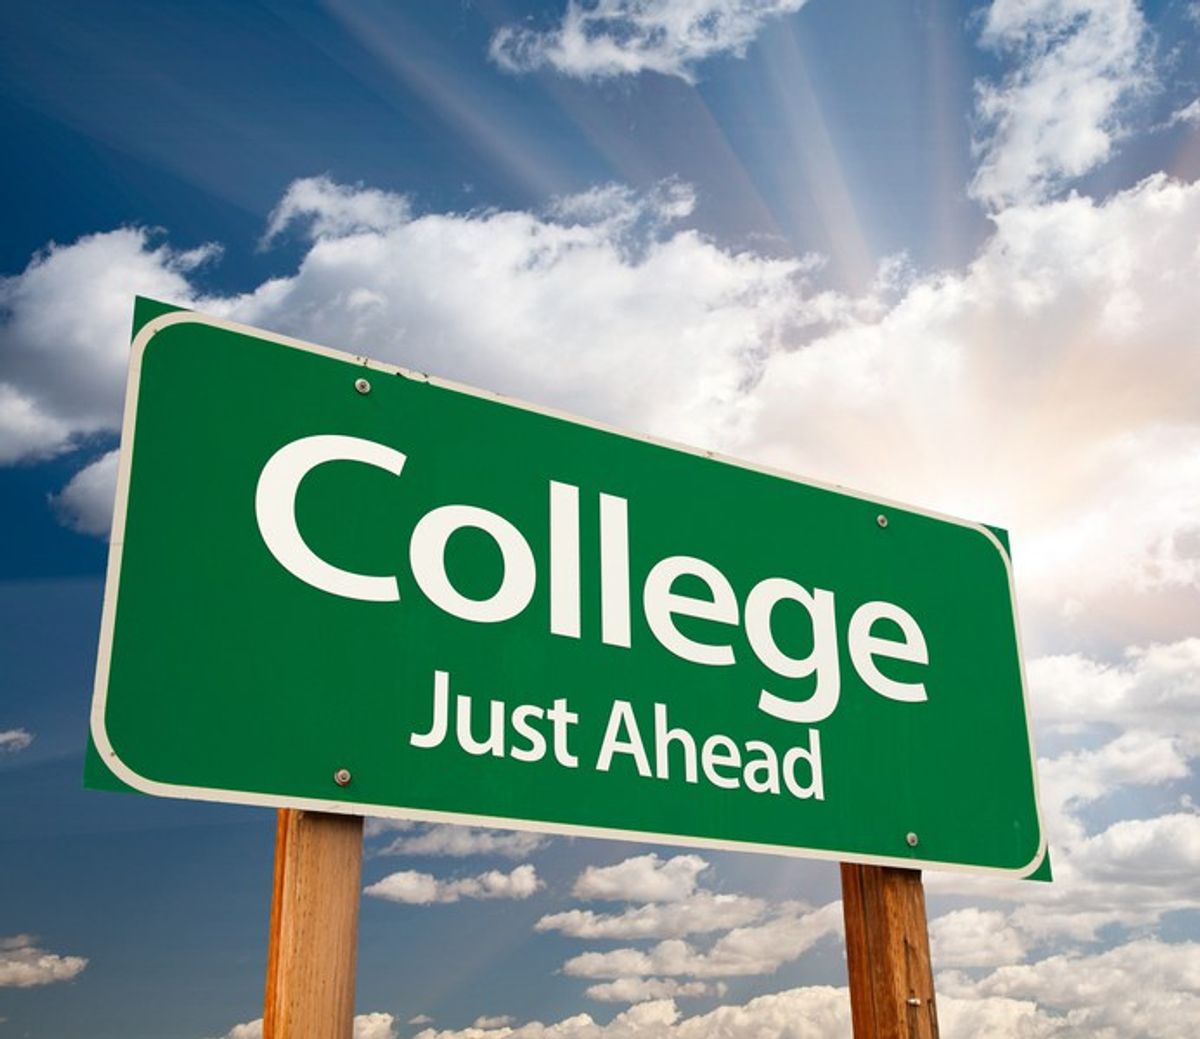 5 Reasons Commuting To College Was the Best Decision